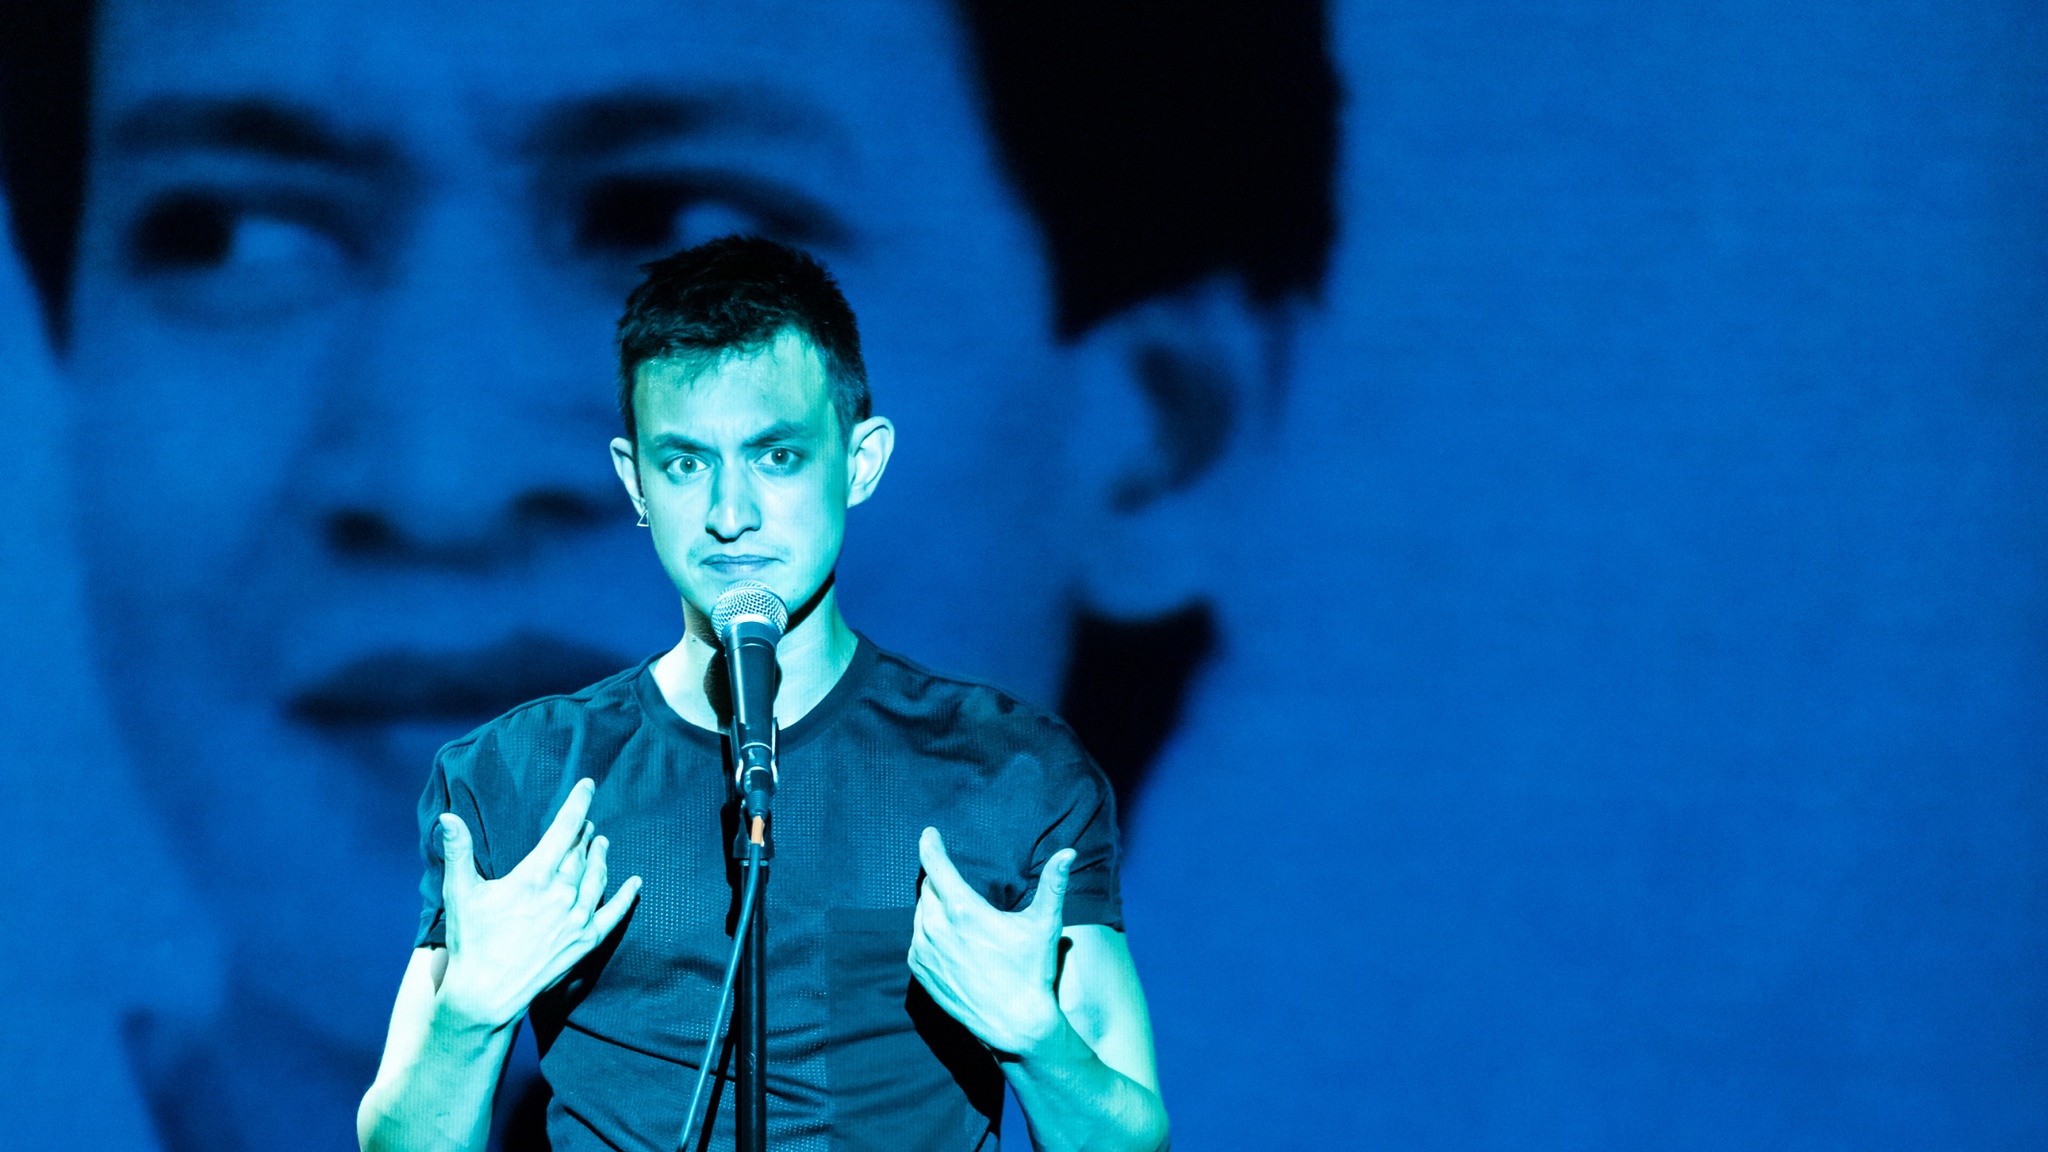 The artist Kyle Dacuyan, a Filipino performer with short dark hair, stands before a microphone bathed in a turquoise light. He trains his gaze intently at us with his mouth drawn tightly closed. He holds his hands up to his chest as if to gesture toward himself. On the wall behind him, an image of a man’s face is projected in a cerulean light at a larger than life scale. 